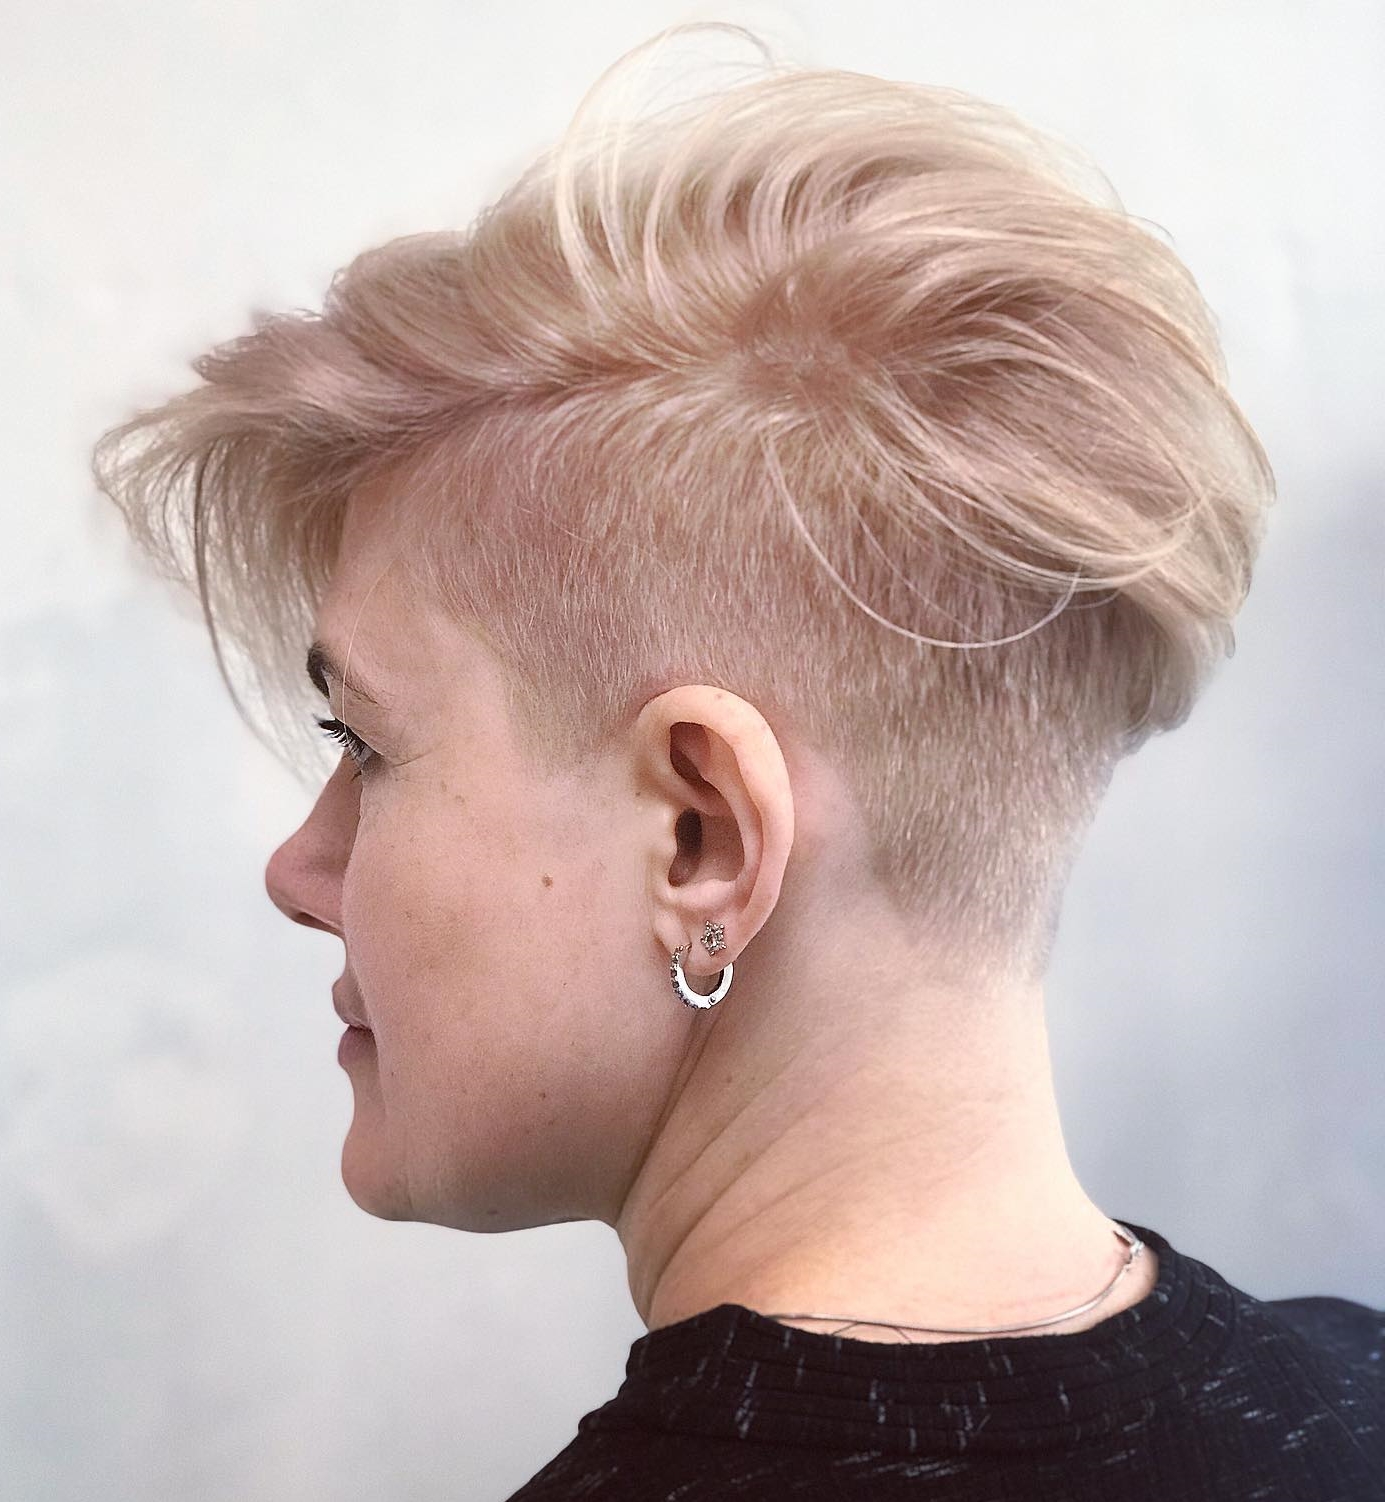 The Undercut Fade: What It Is And How To Rock It - Mens Haircuts